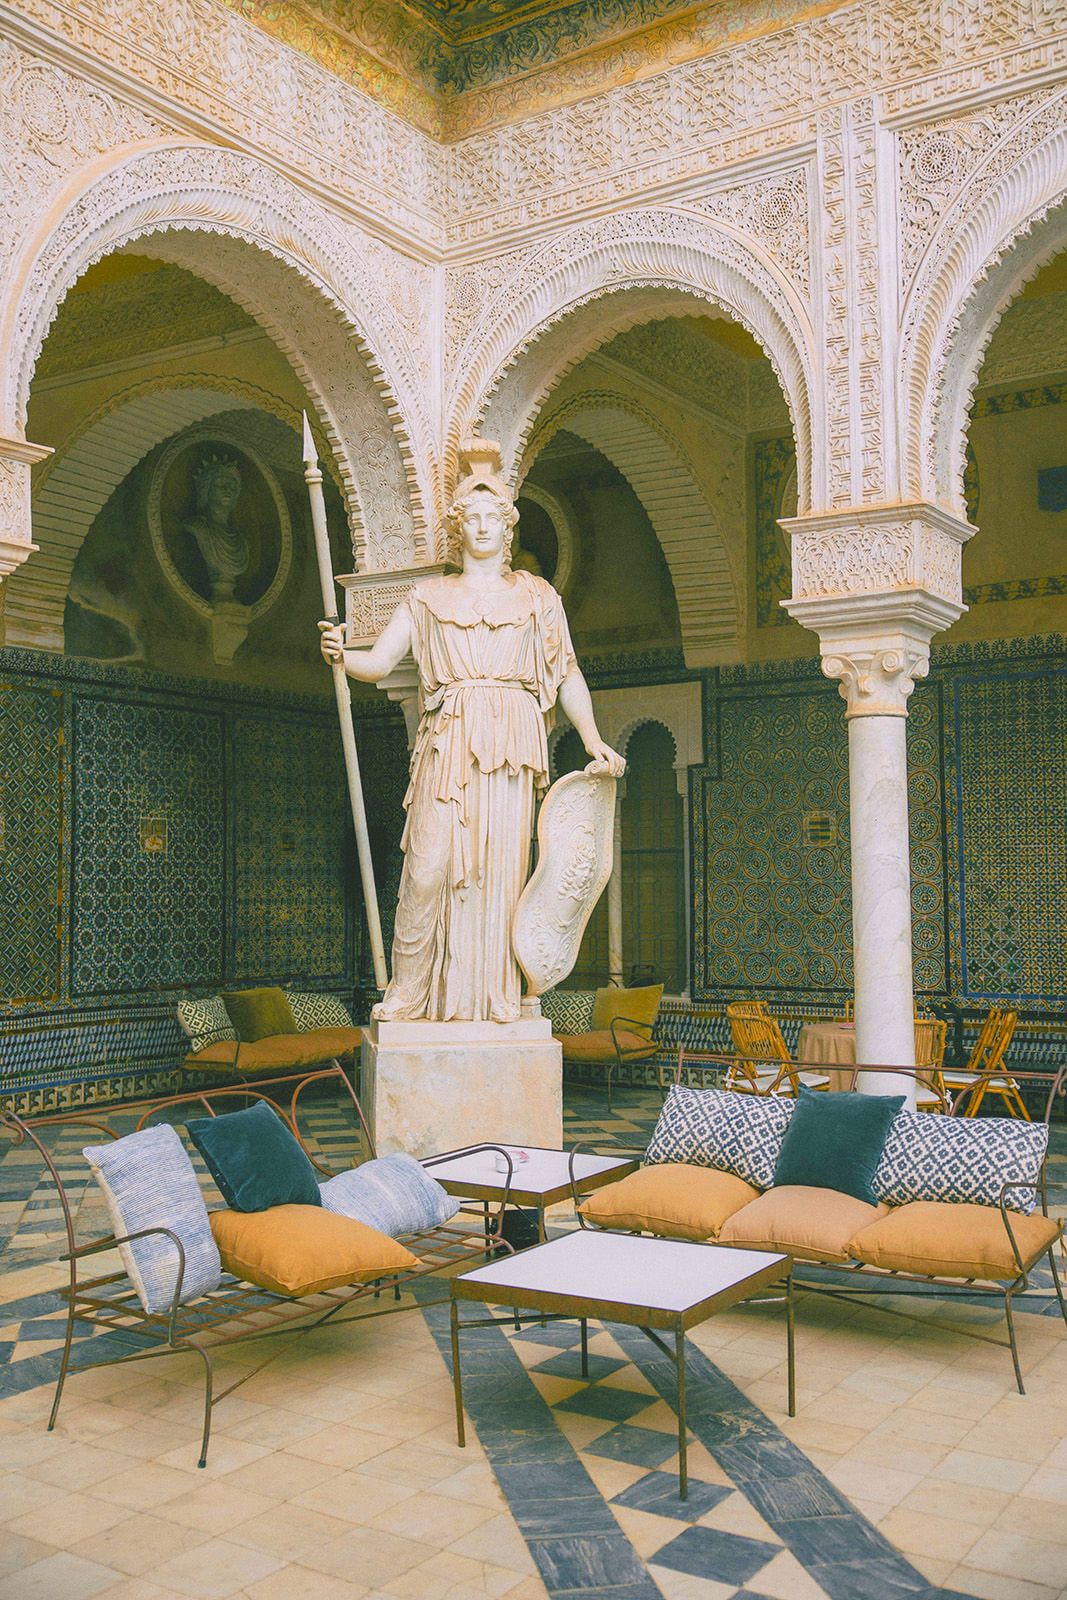 Statue in the courtyard at Andalusian-Moorish party in Seville Spain